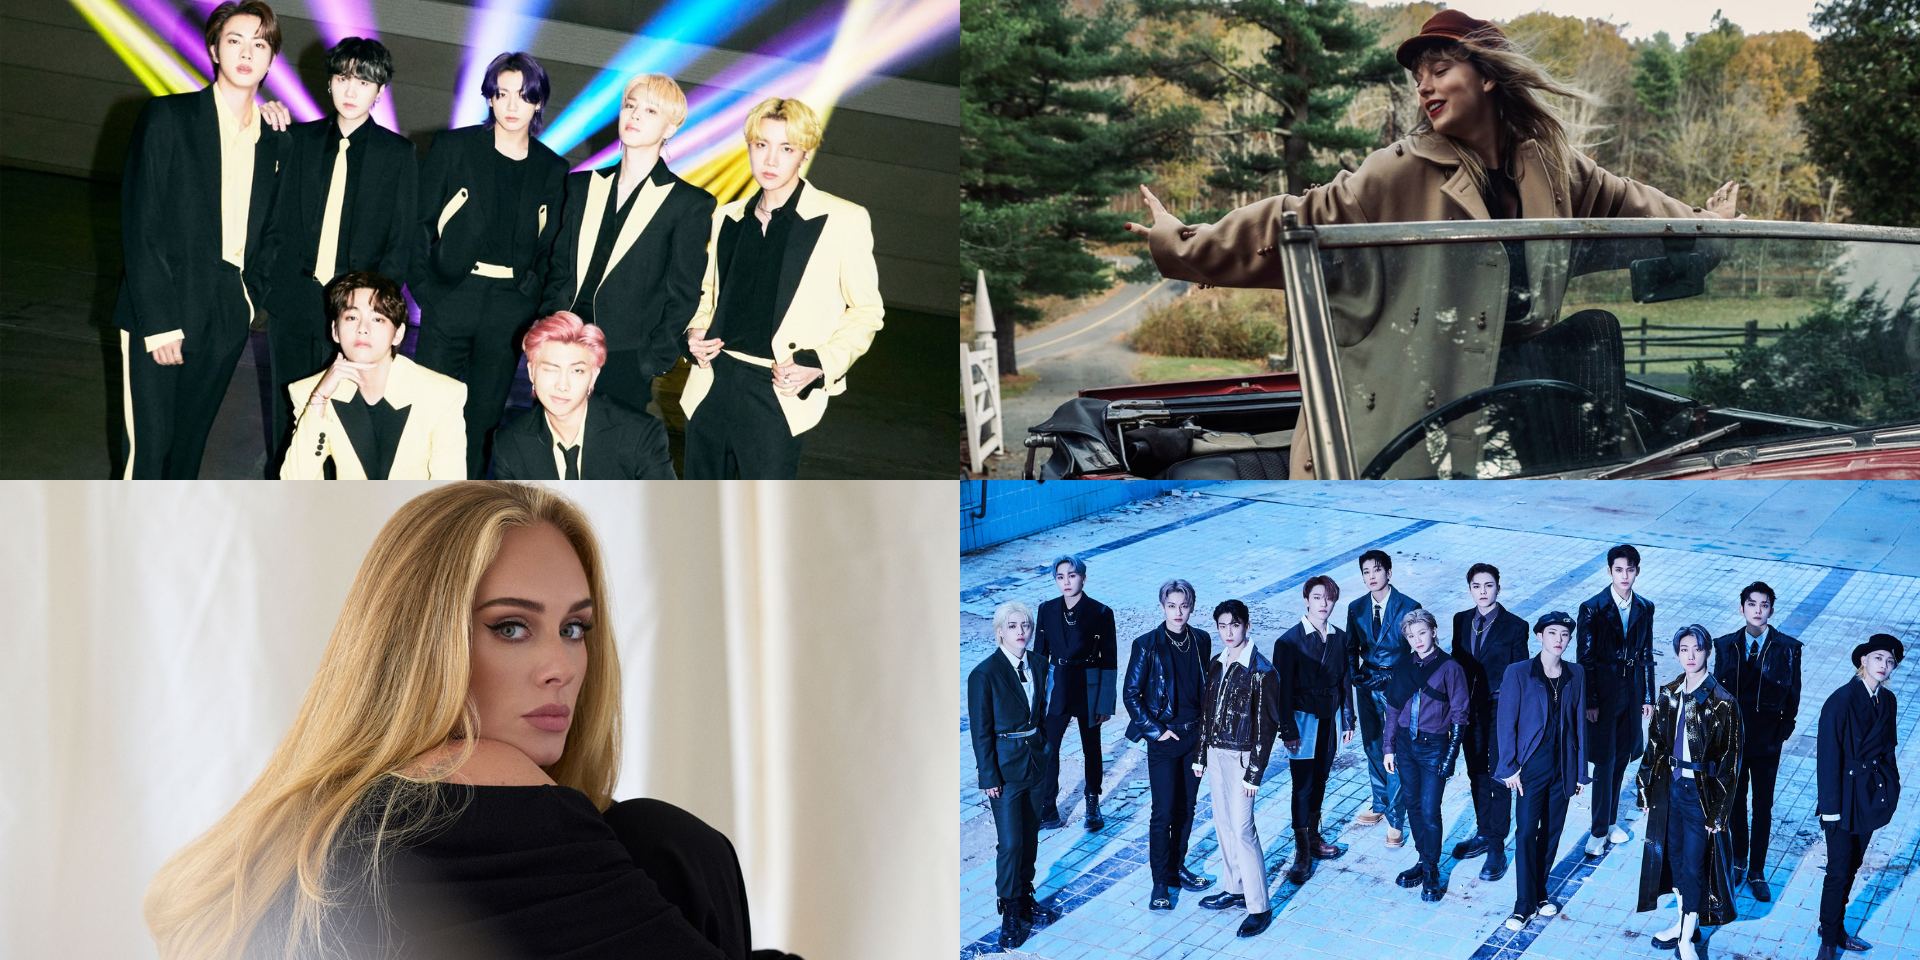 BTS is the IFPI's Global Recording Artist of the Year for 2021, Taylor Swift, Adele, SEVENTEEN, and more round up the Top 10